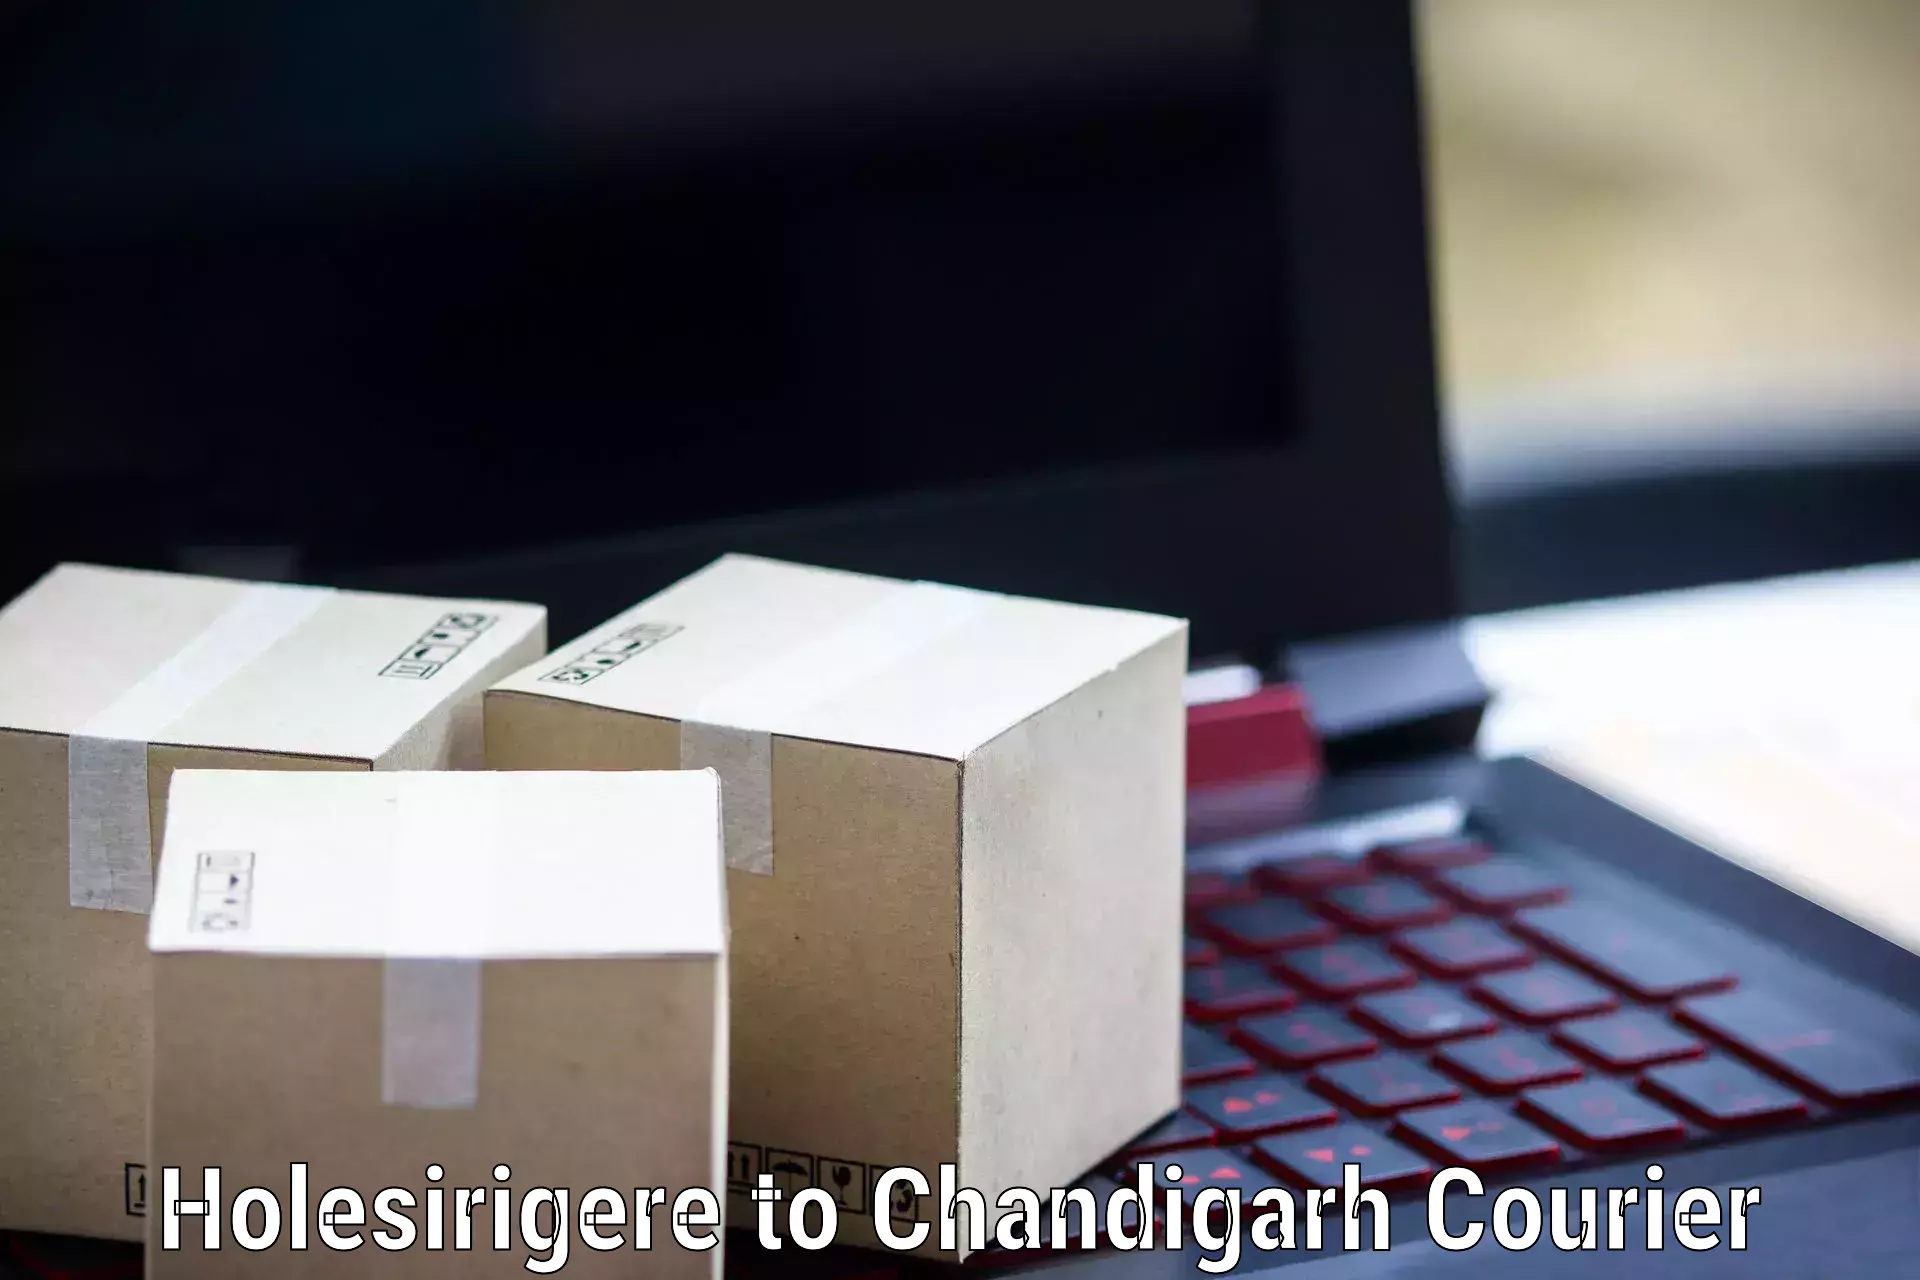 Overnight delivery services Holesirigere to Chandigarh